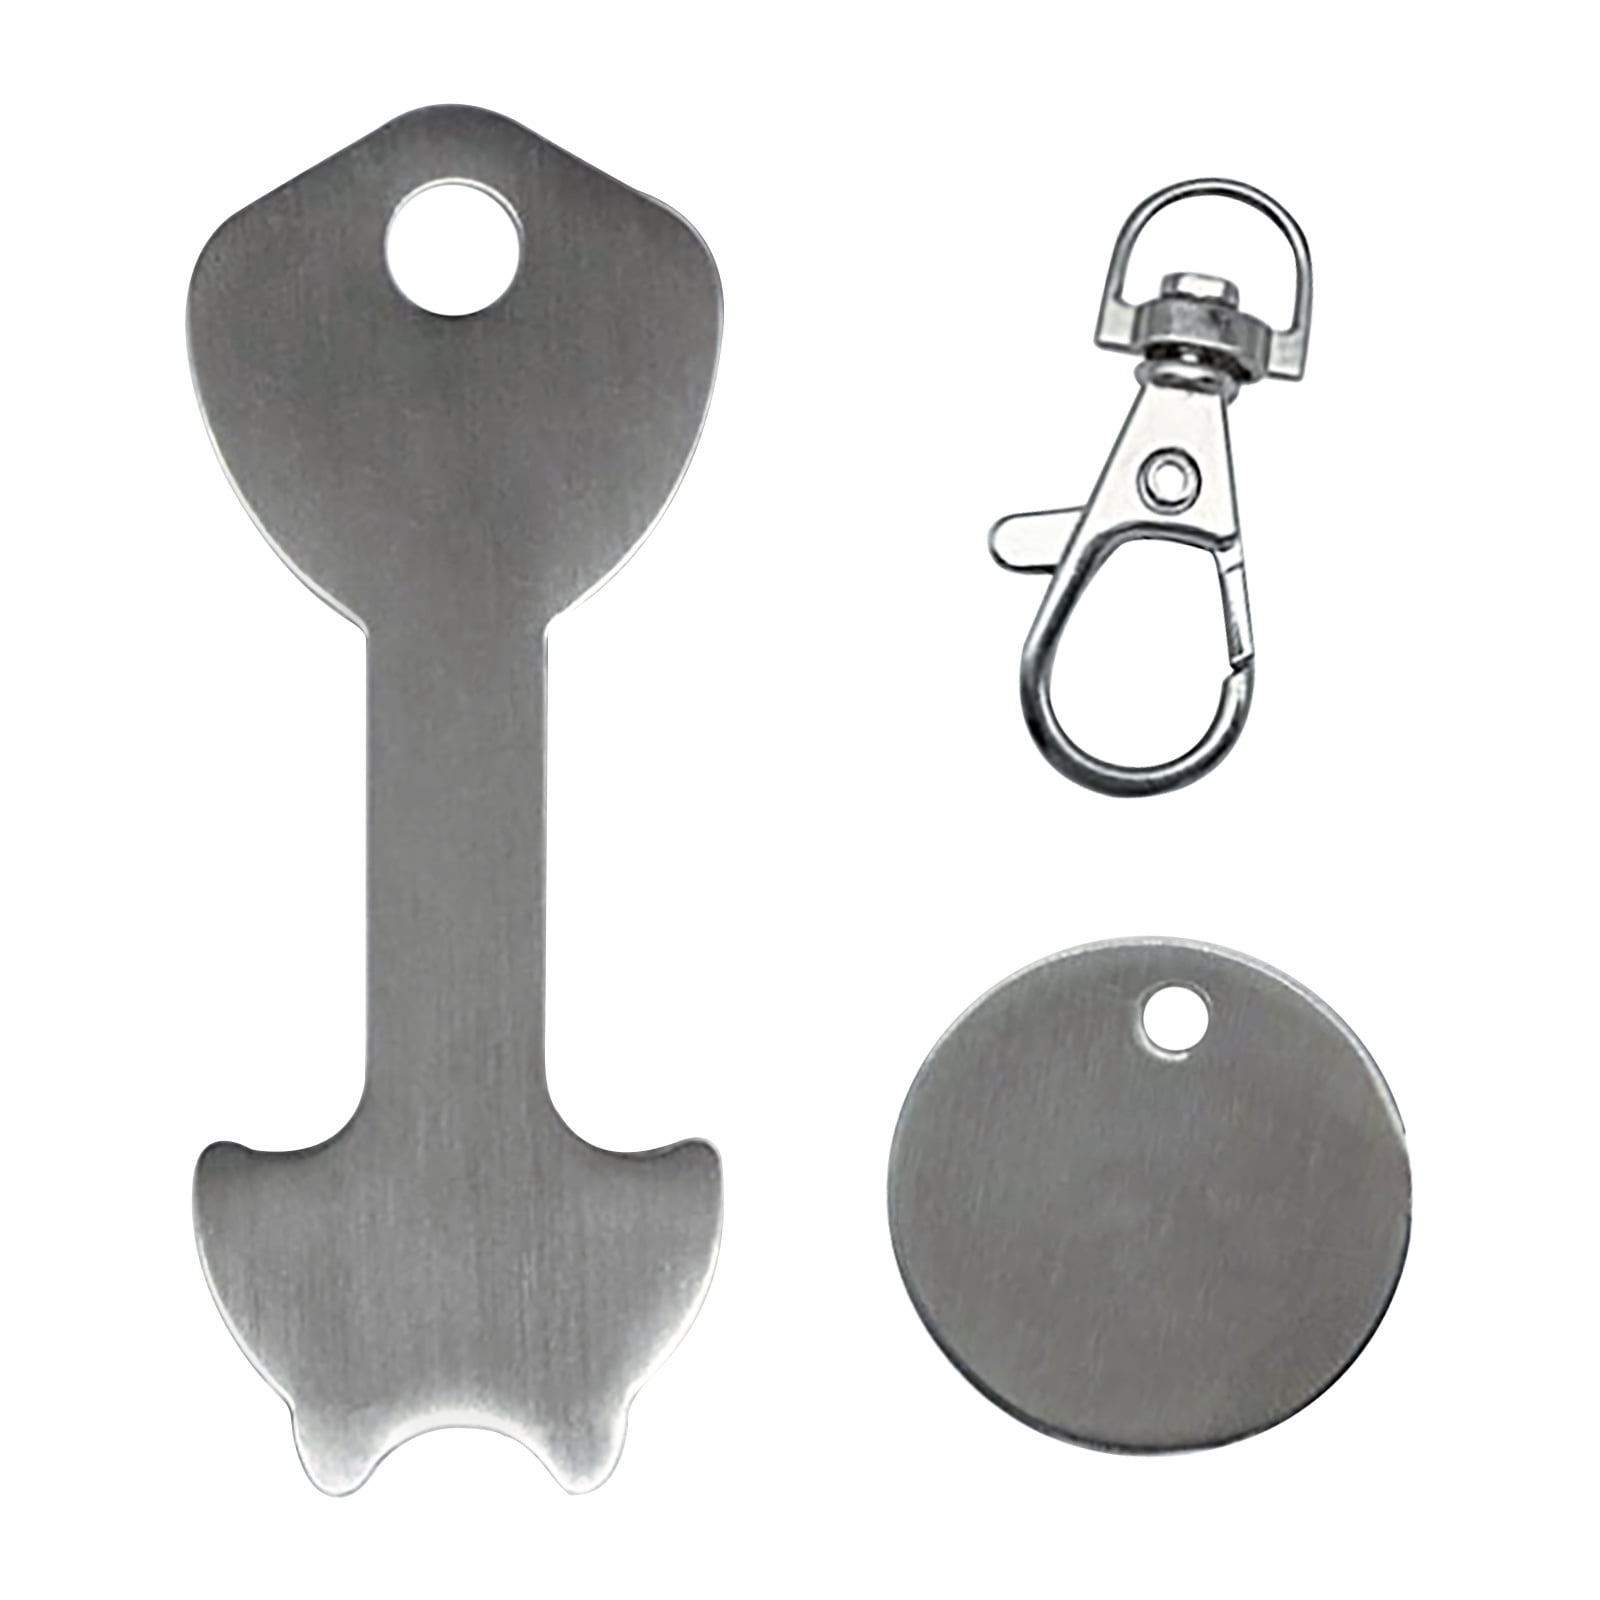 Removable Shopping Trolley Key Stainless Steel 